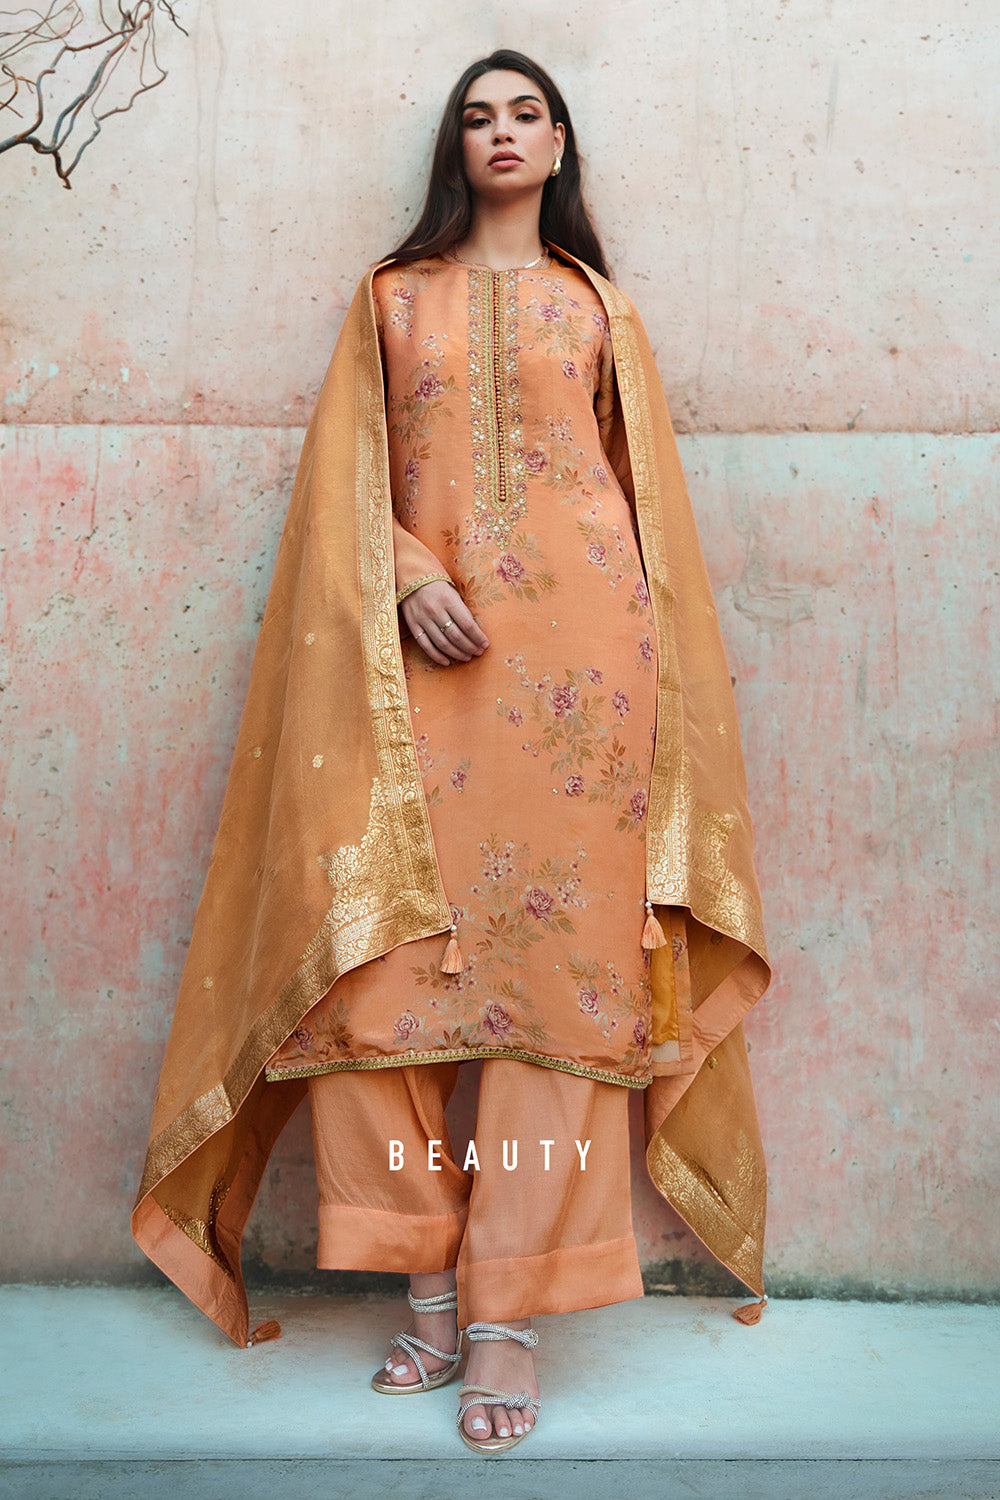 Peach Color Floral Printed & Neck Embroidered Unstitched Suit Material